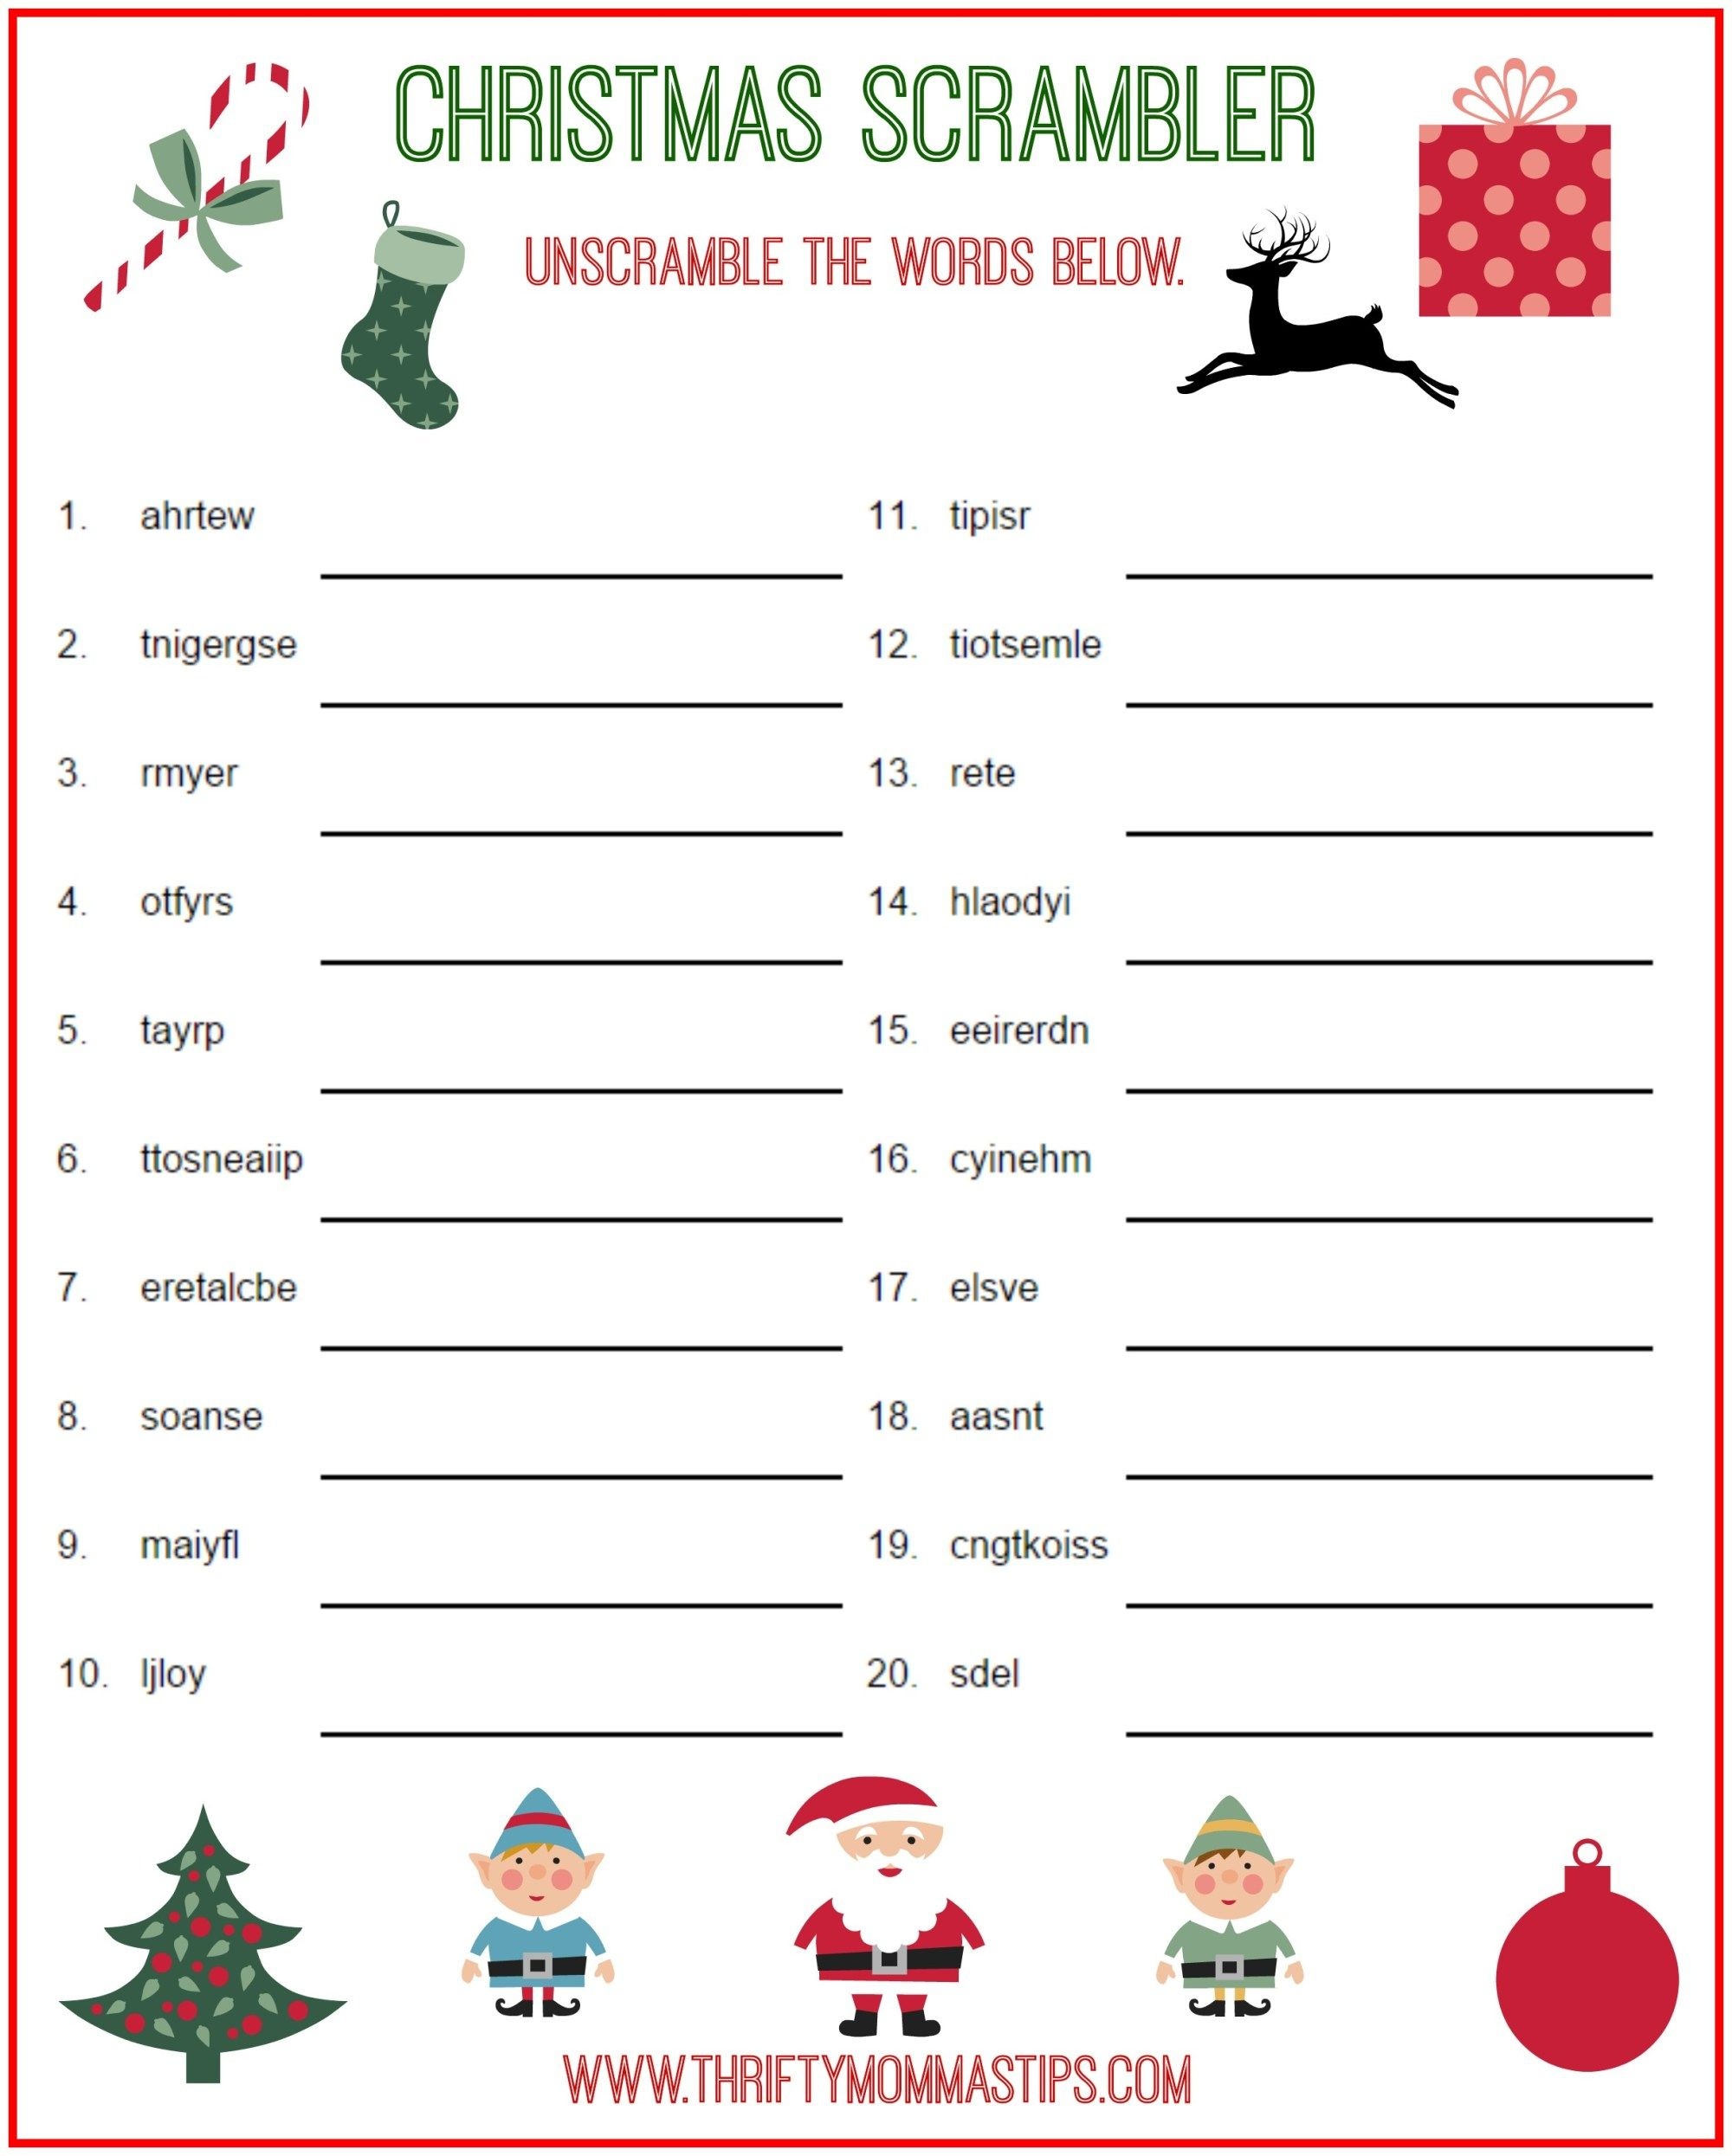 Christmas Scrambler Free Kids Puzzle Printables | Christmas Family - Free Printable Christmas Games And Puzzles